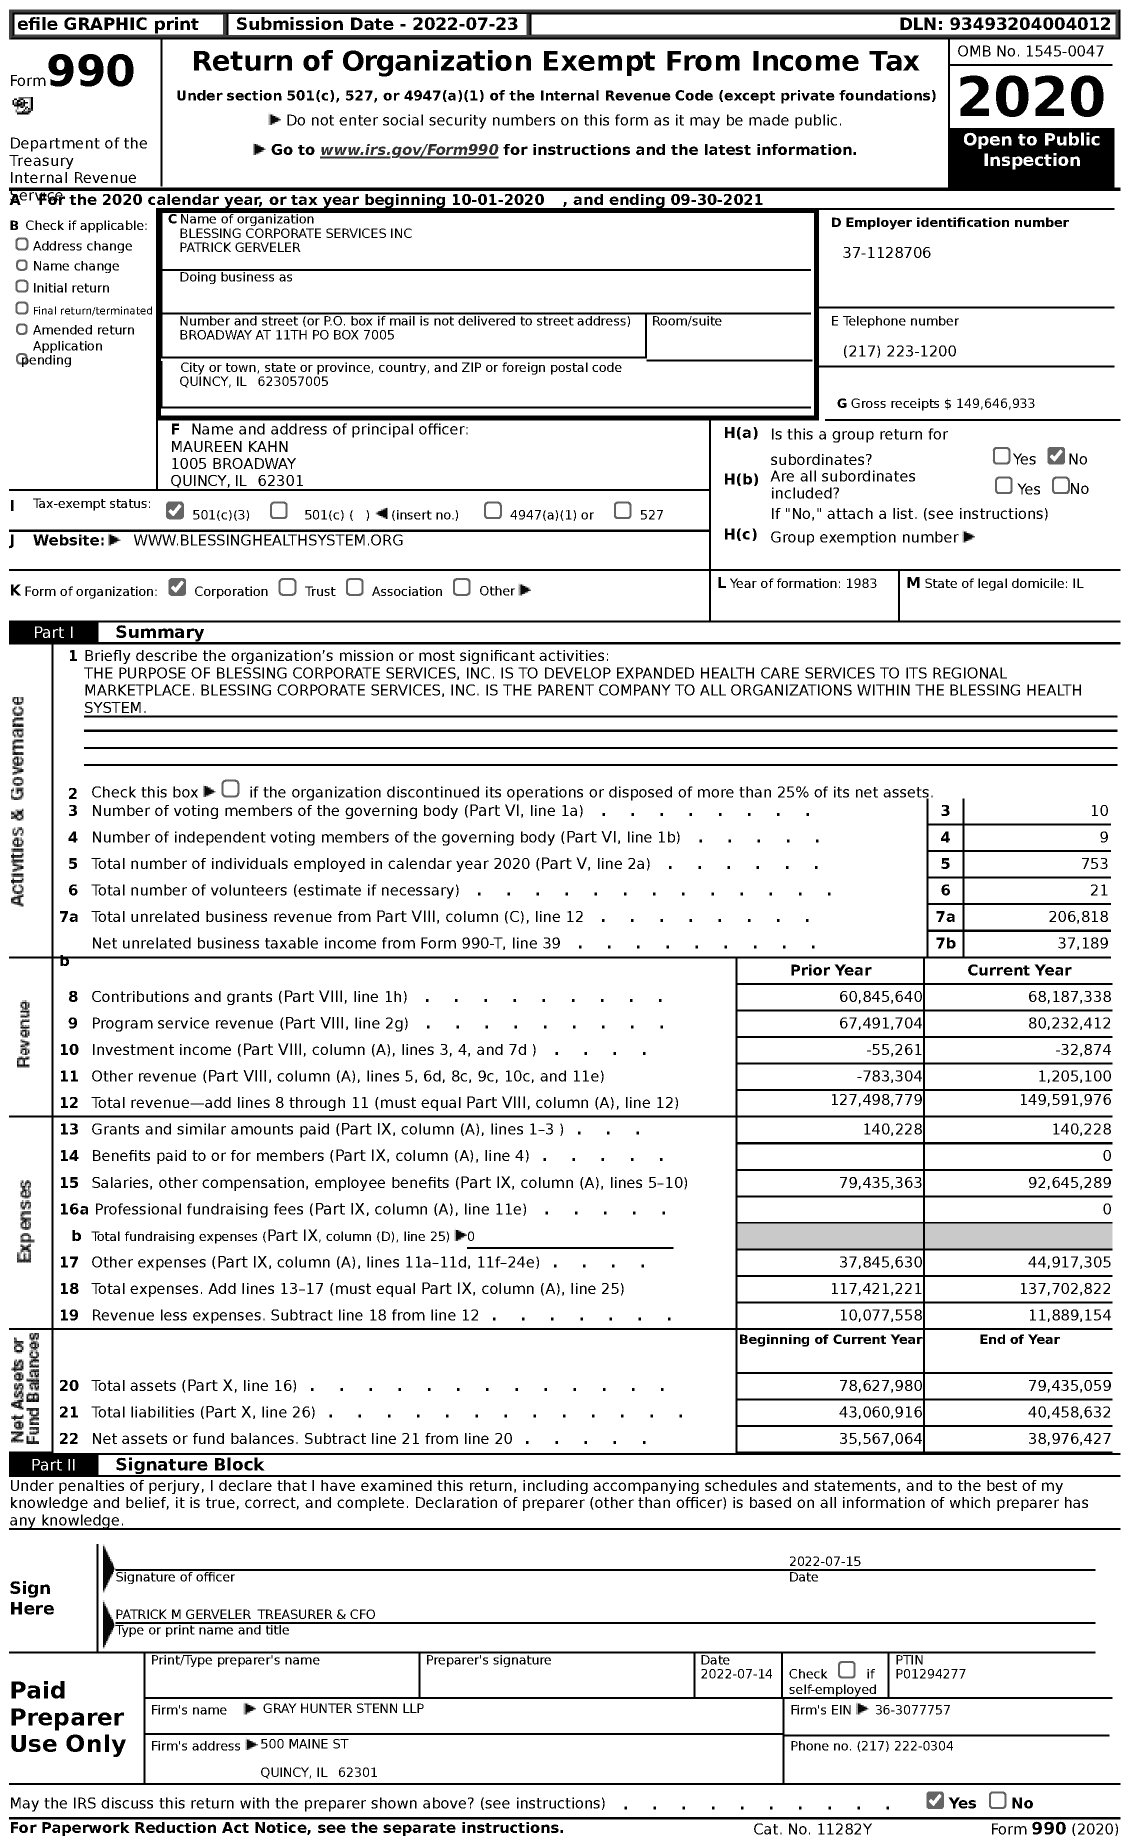 Image of first page of 2020 Form 990 for Blessing Corporate Services Patrick Gerveler